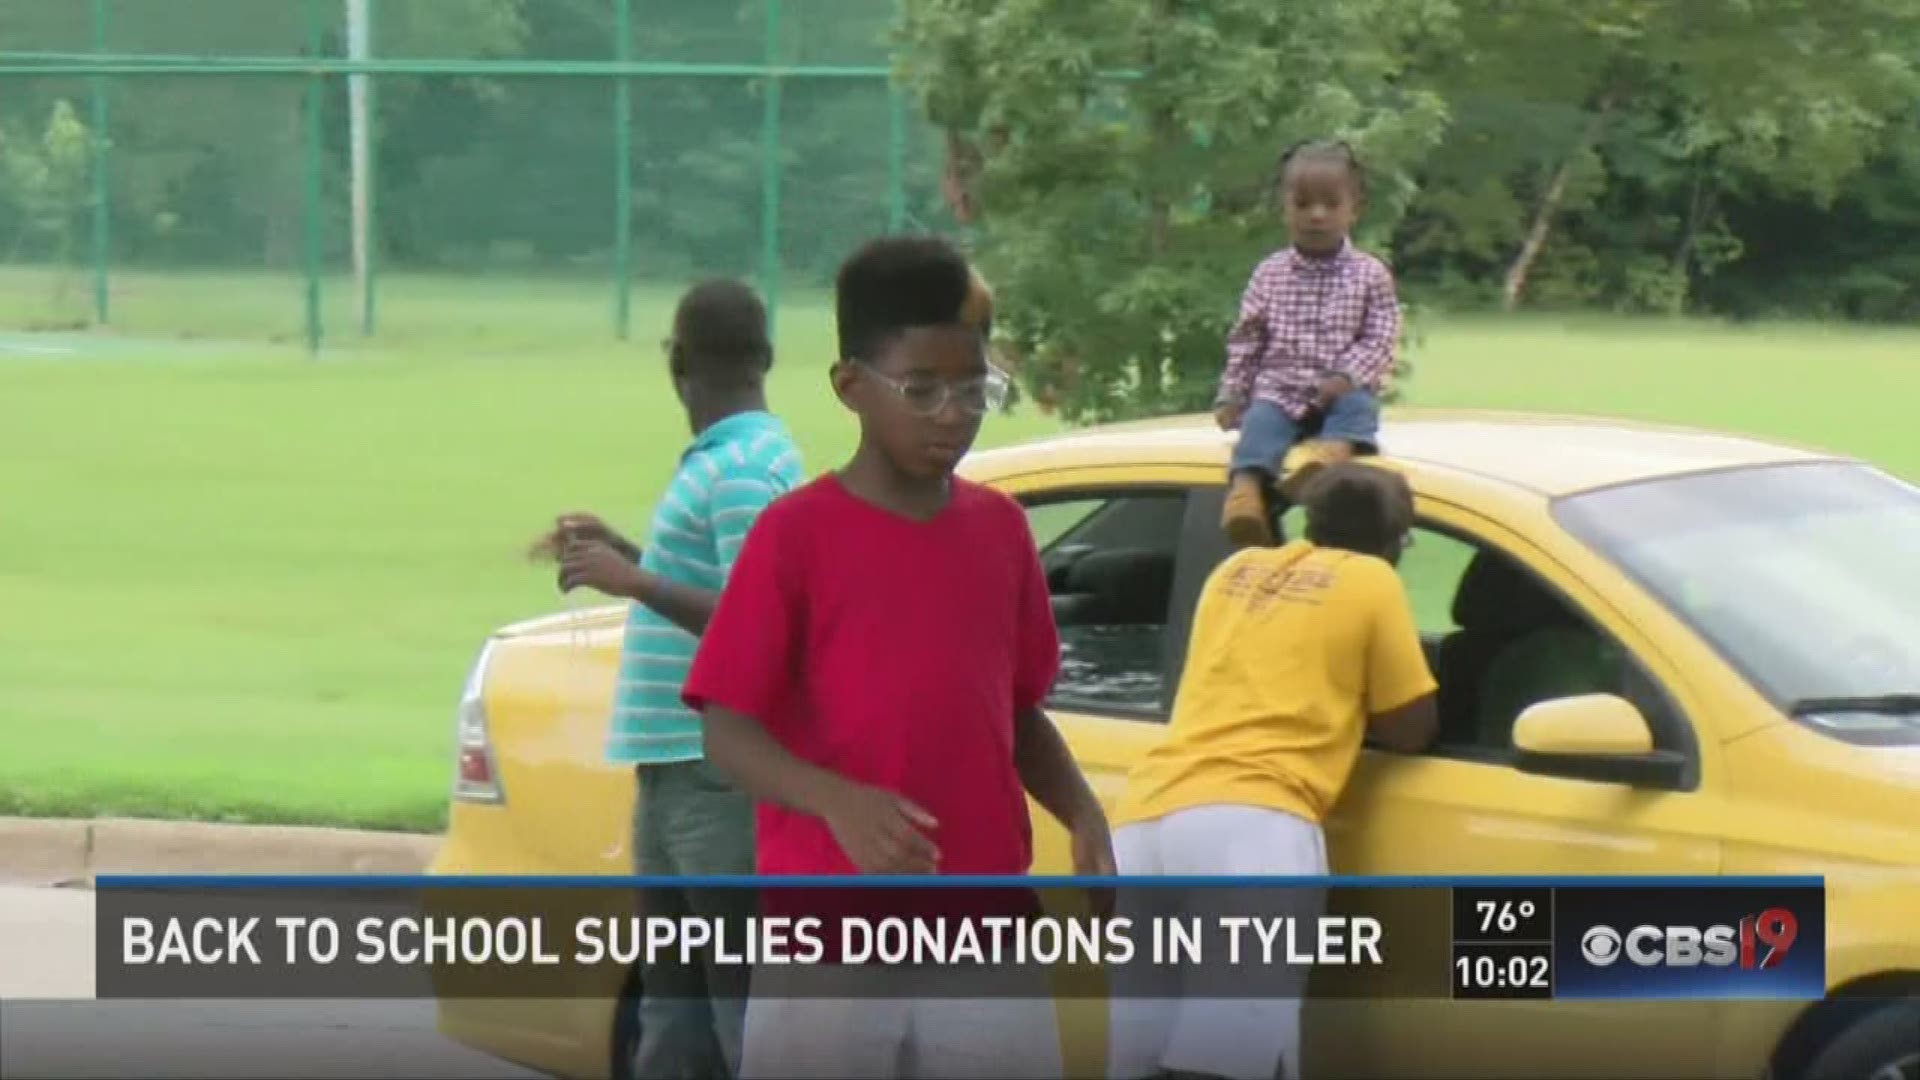 A community drive was held at Woldert Park on August 21 for donated school supplies